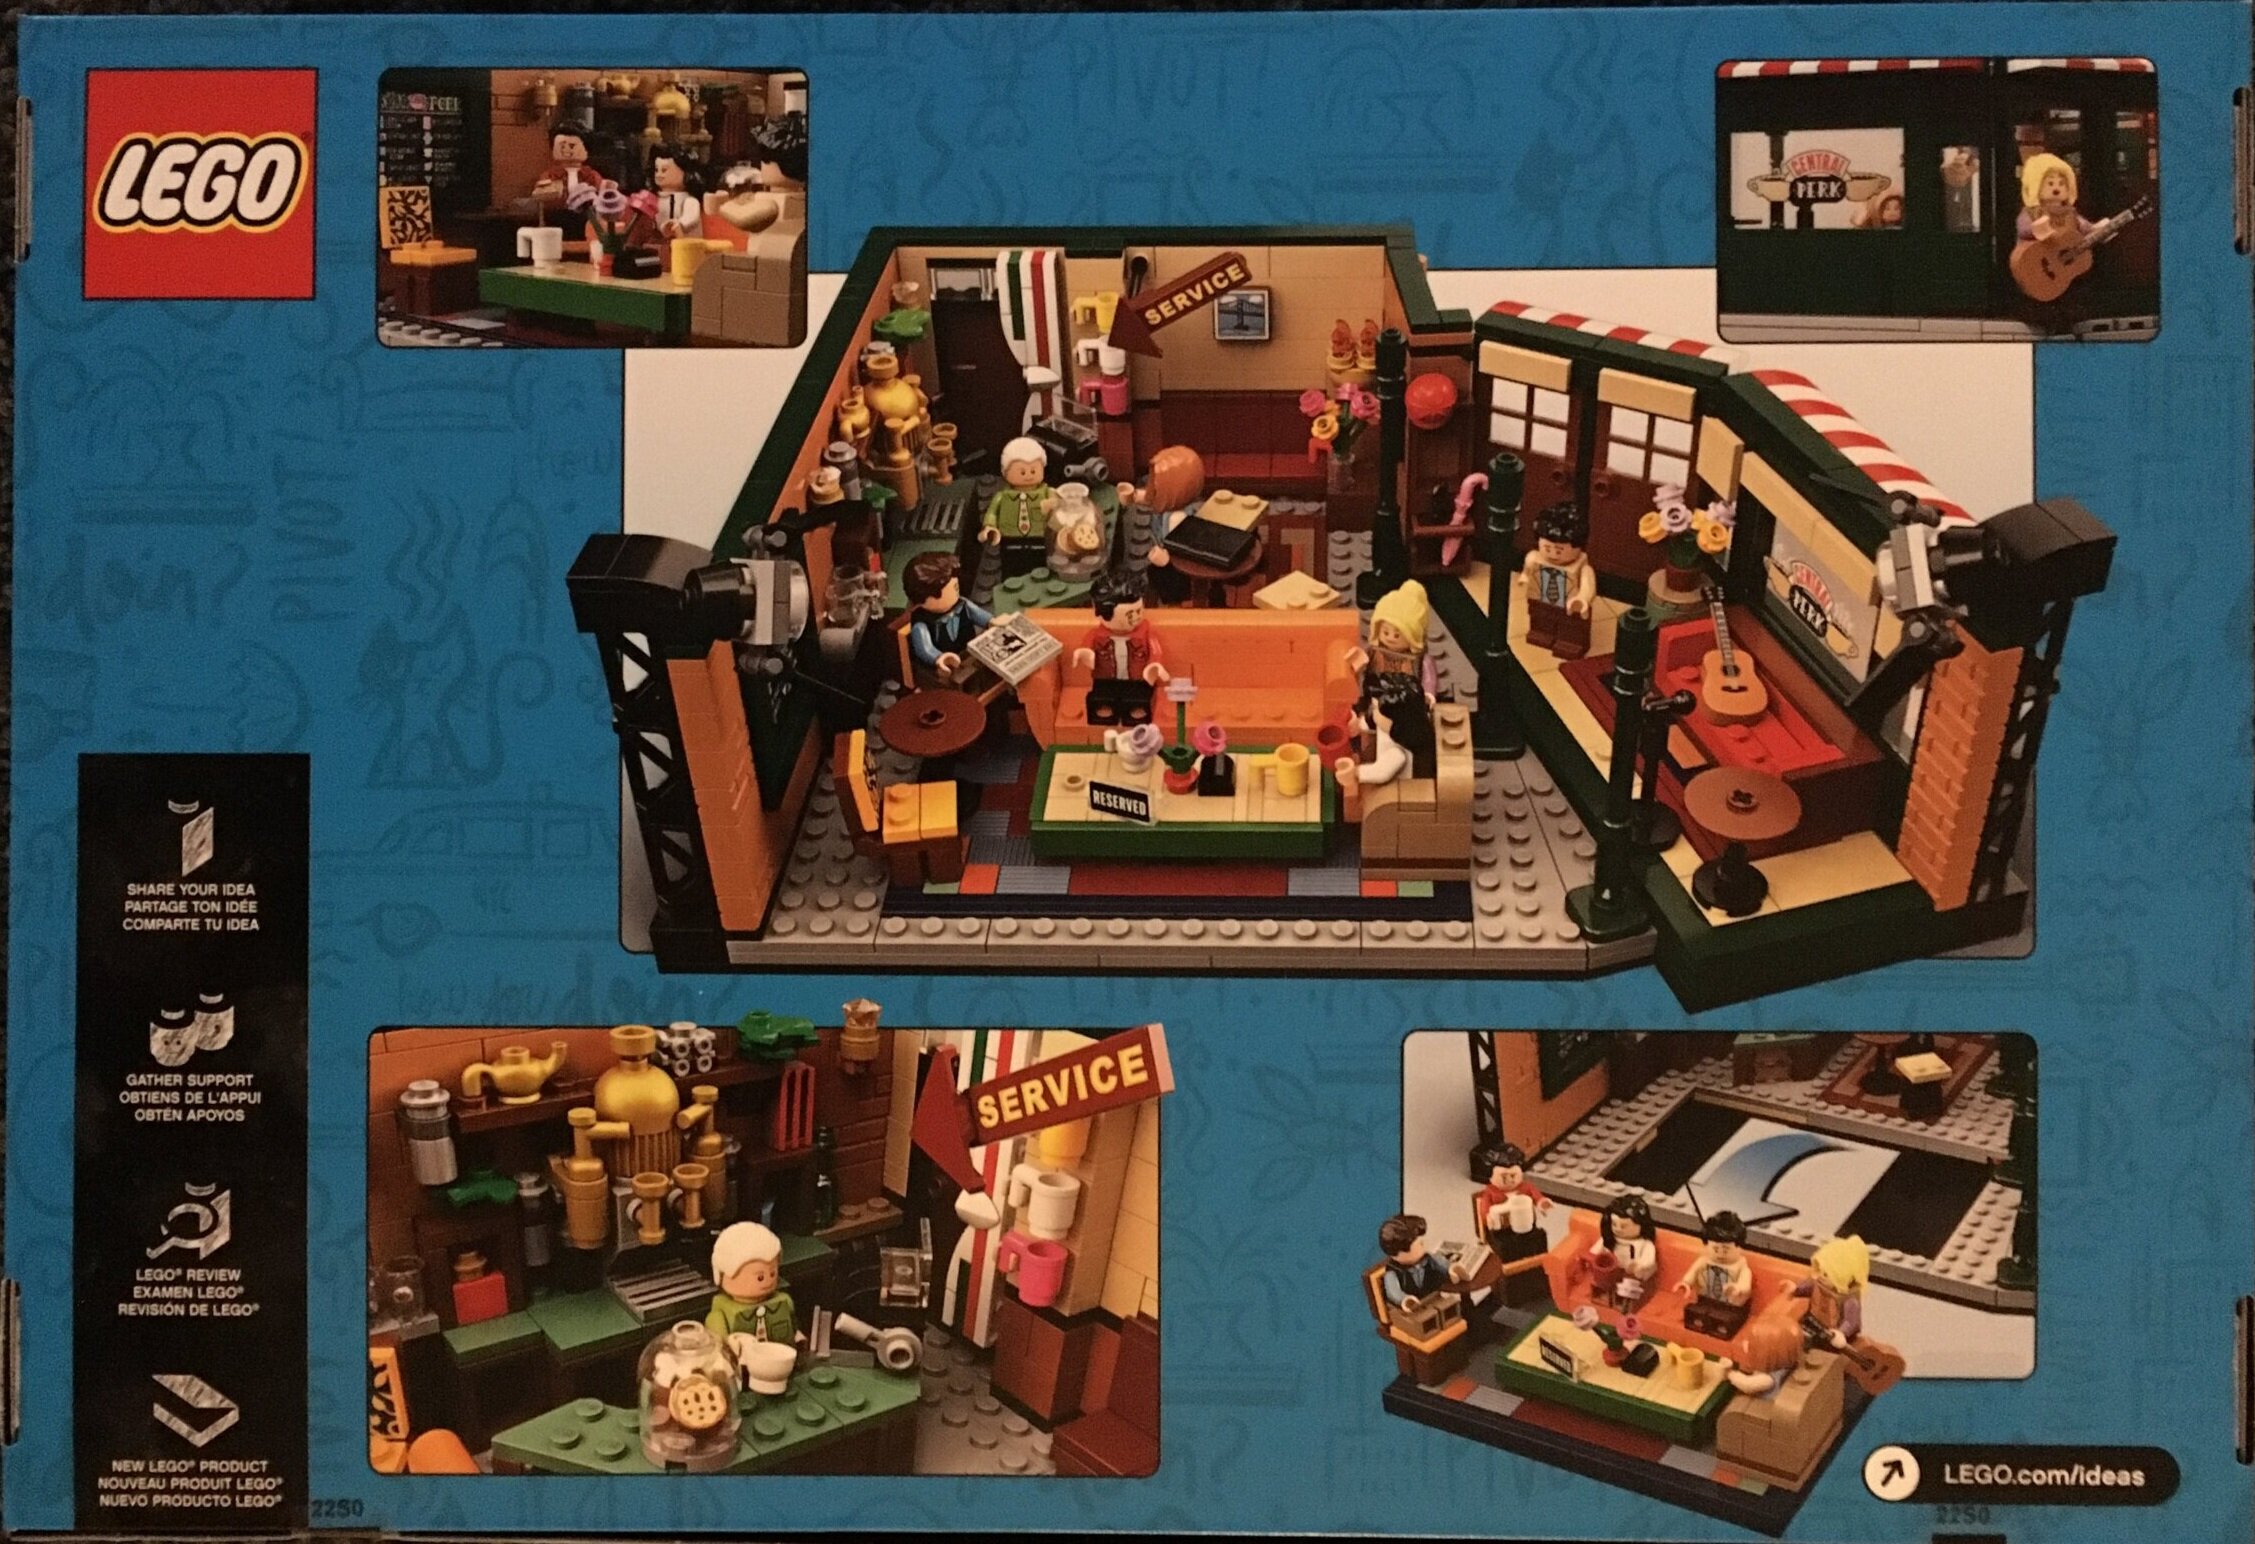 LEGO 21319 Central Perk review